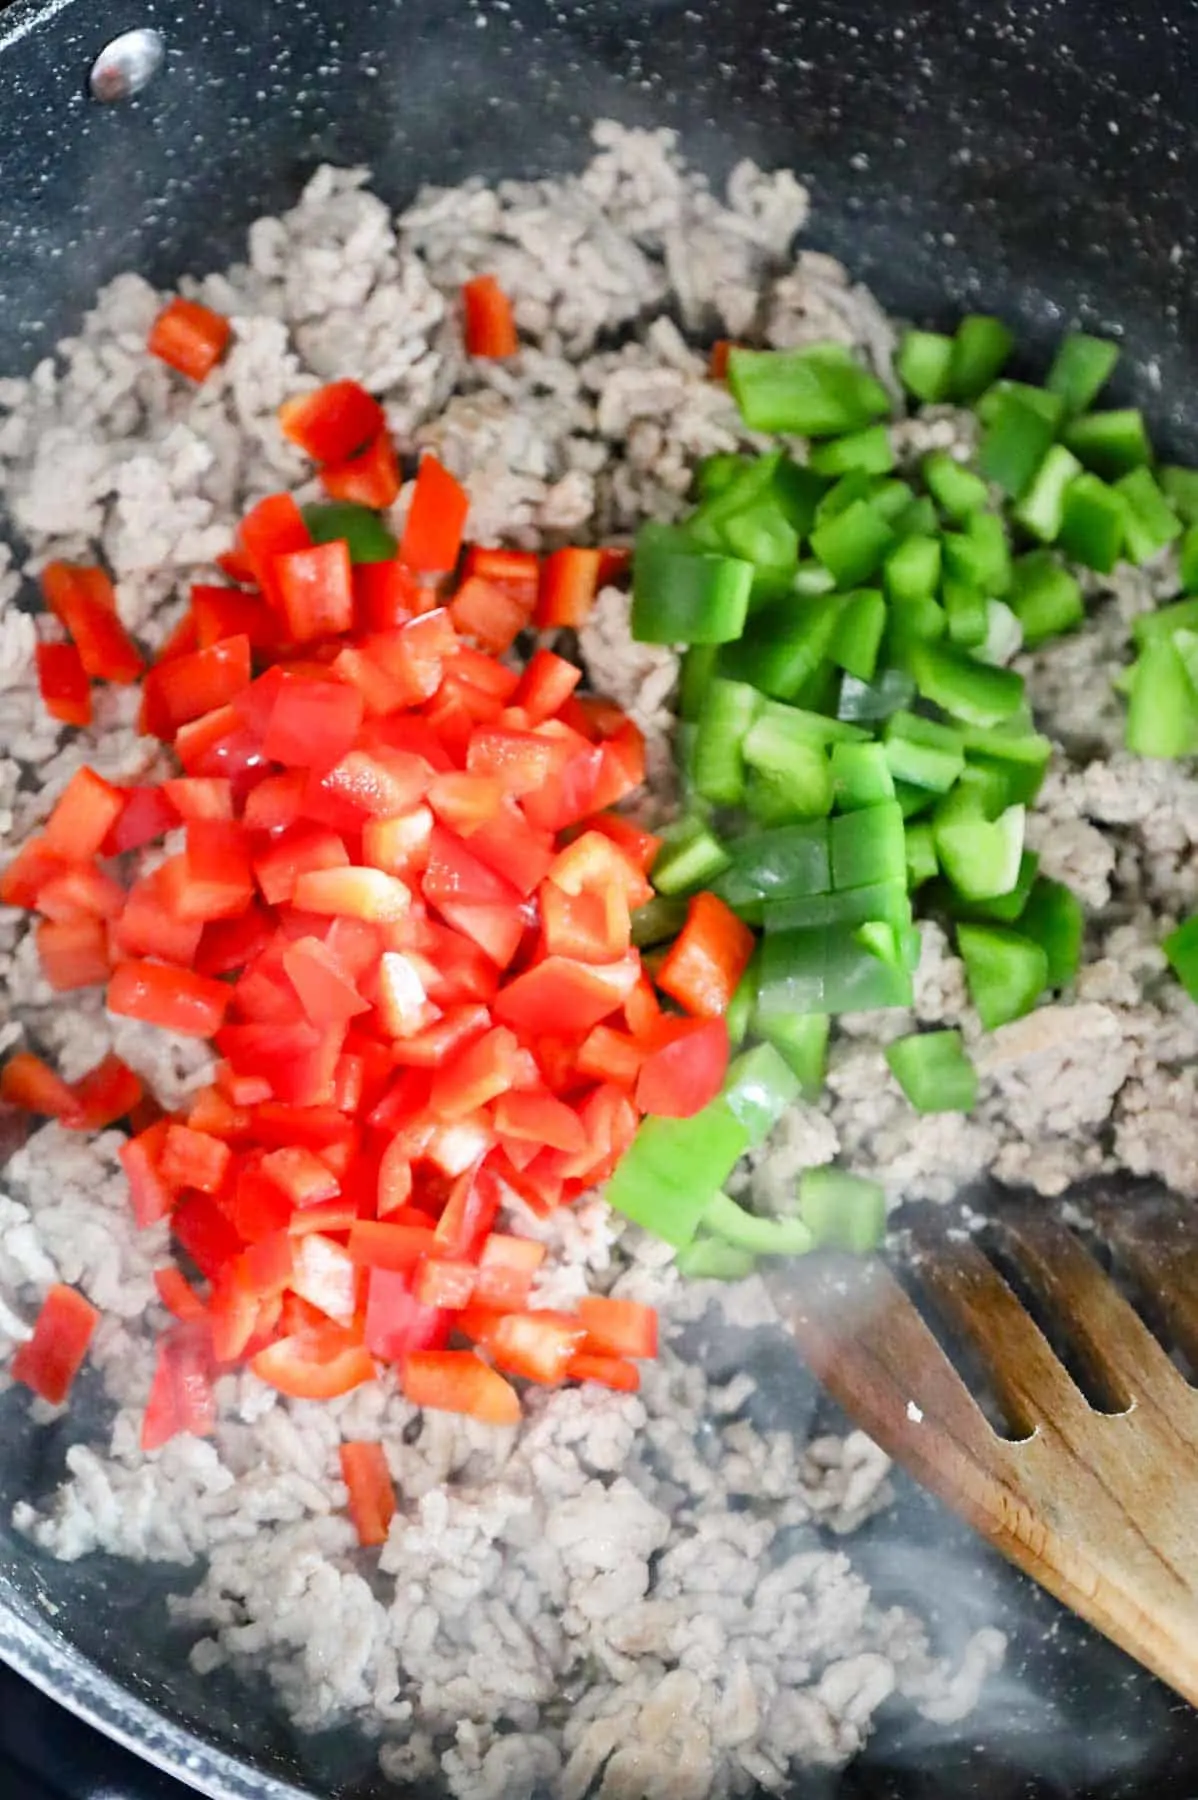 diced red and green bell peppers on top of cooked ground chicken in a skillet